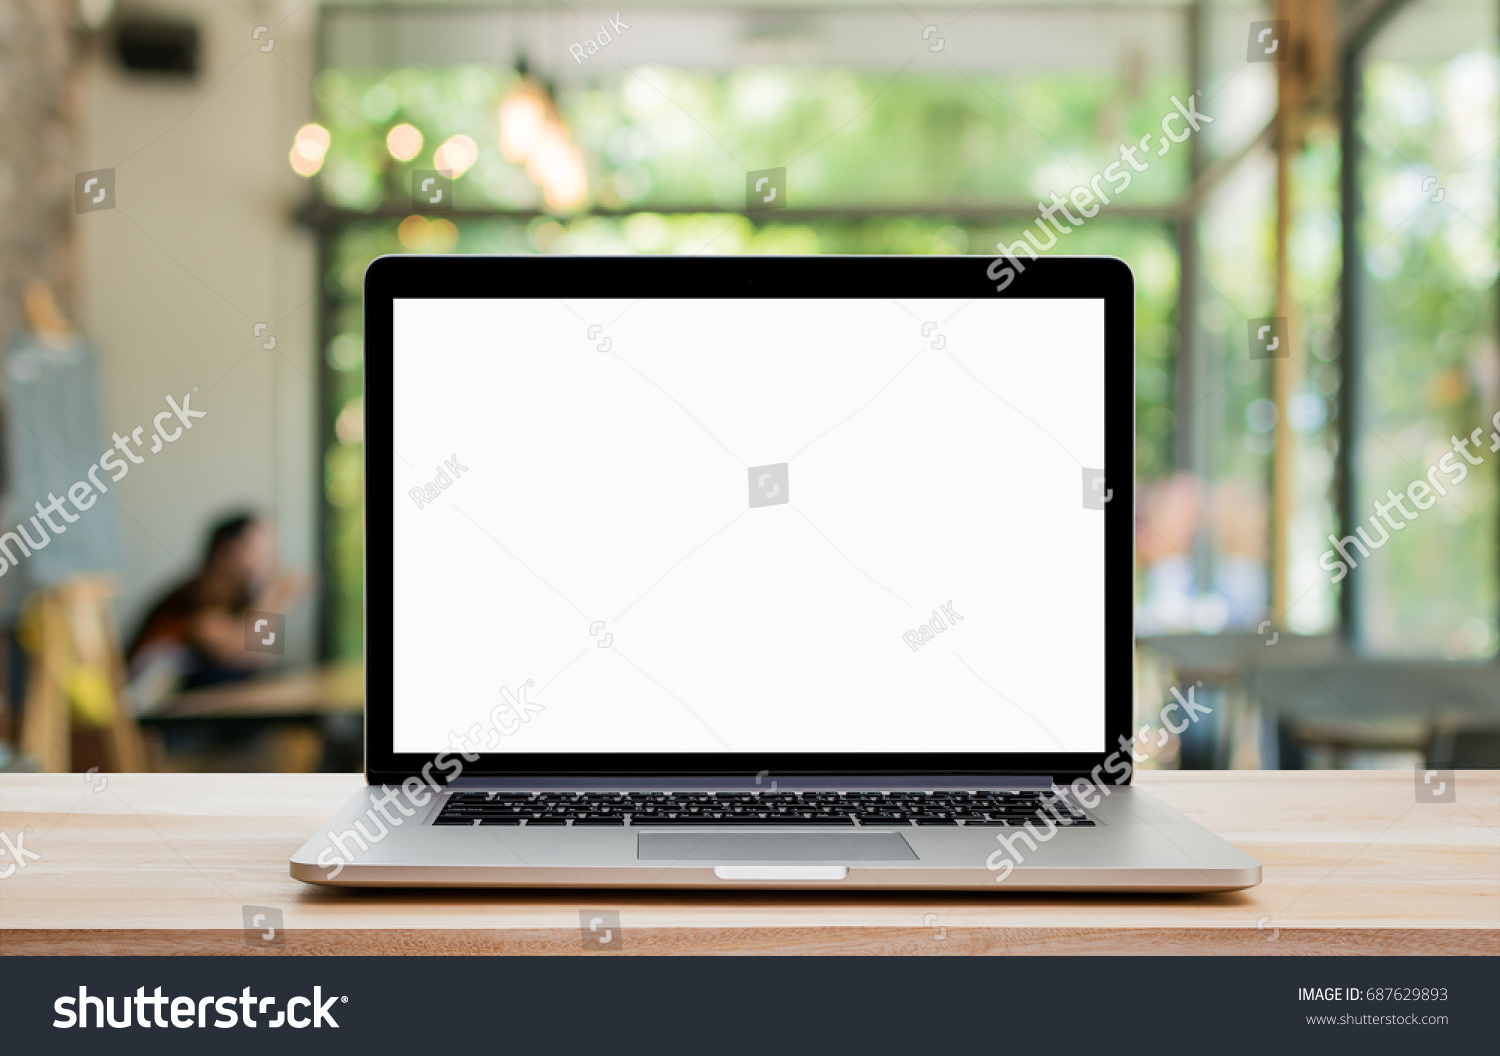 Laptop with blank screen on wood table and coffee shop background. Clipping path include. #687629893